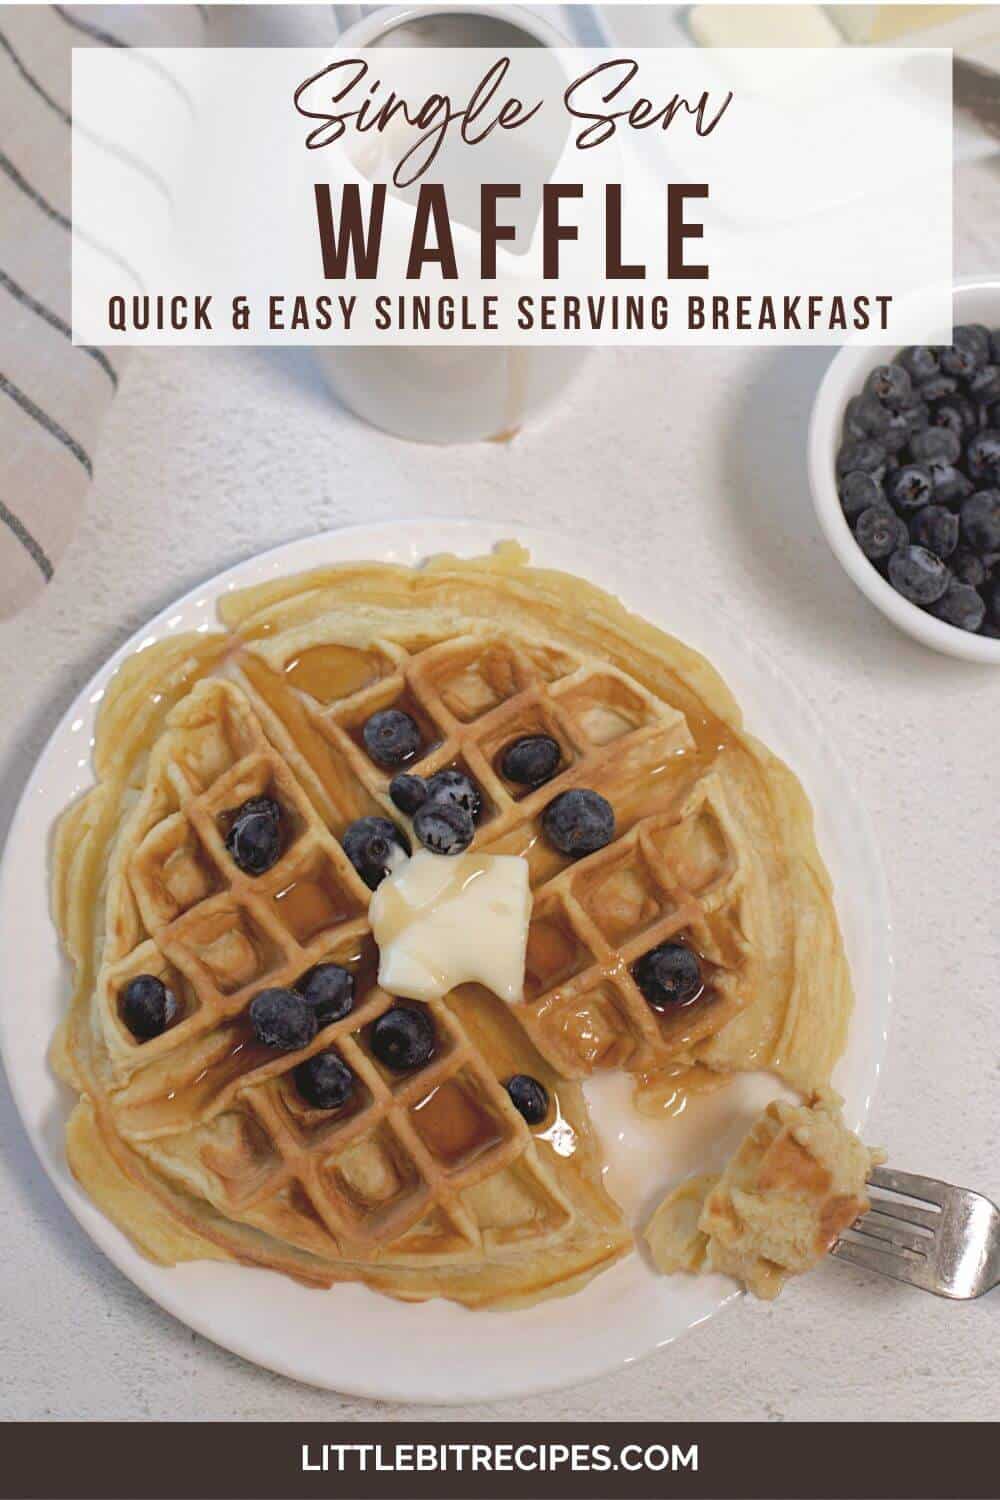 single serve waffle with text.